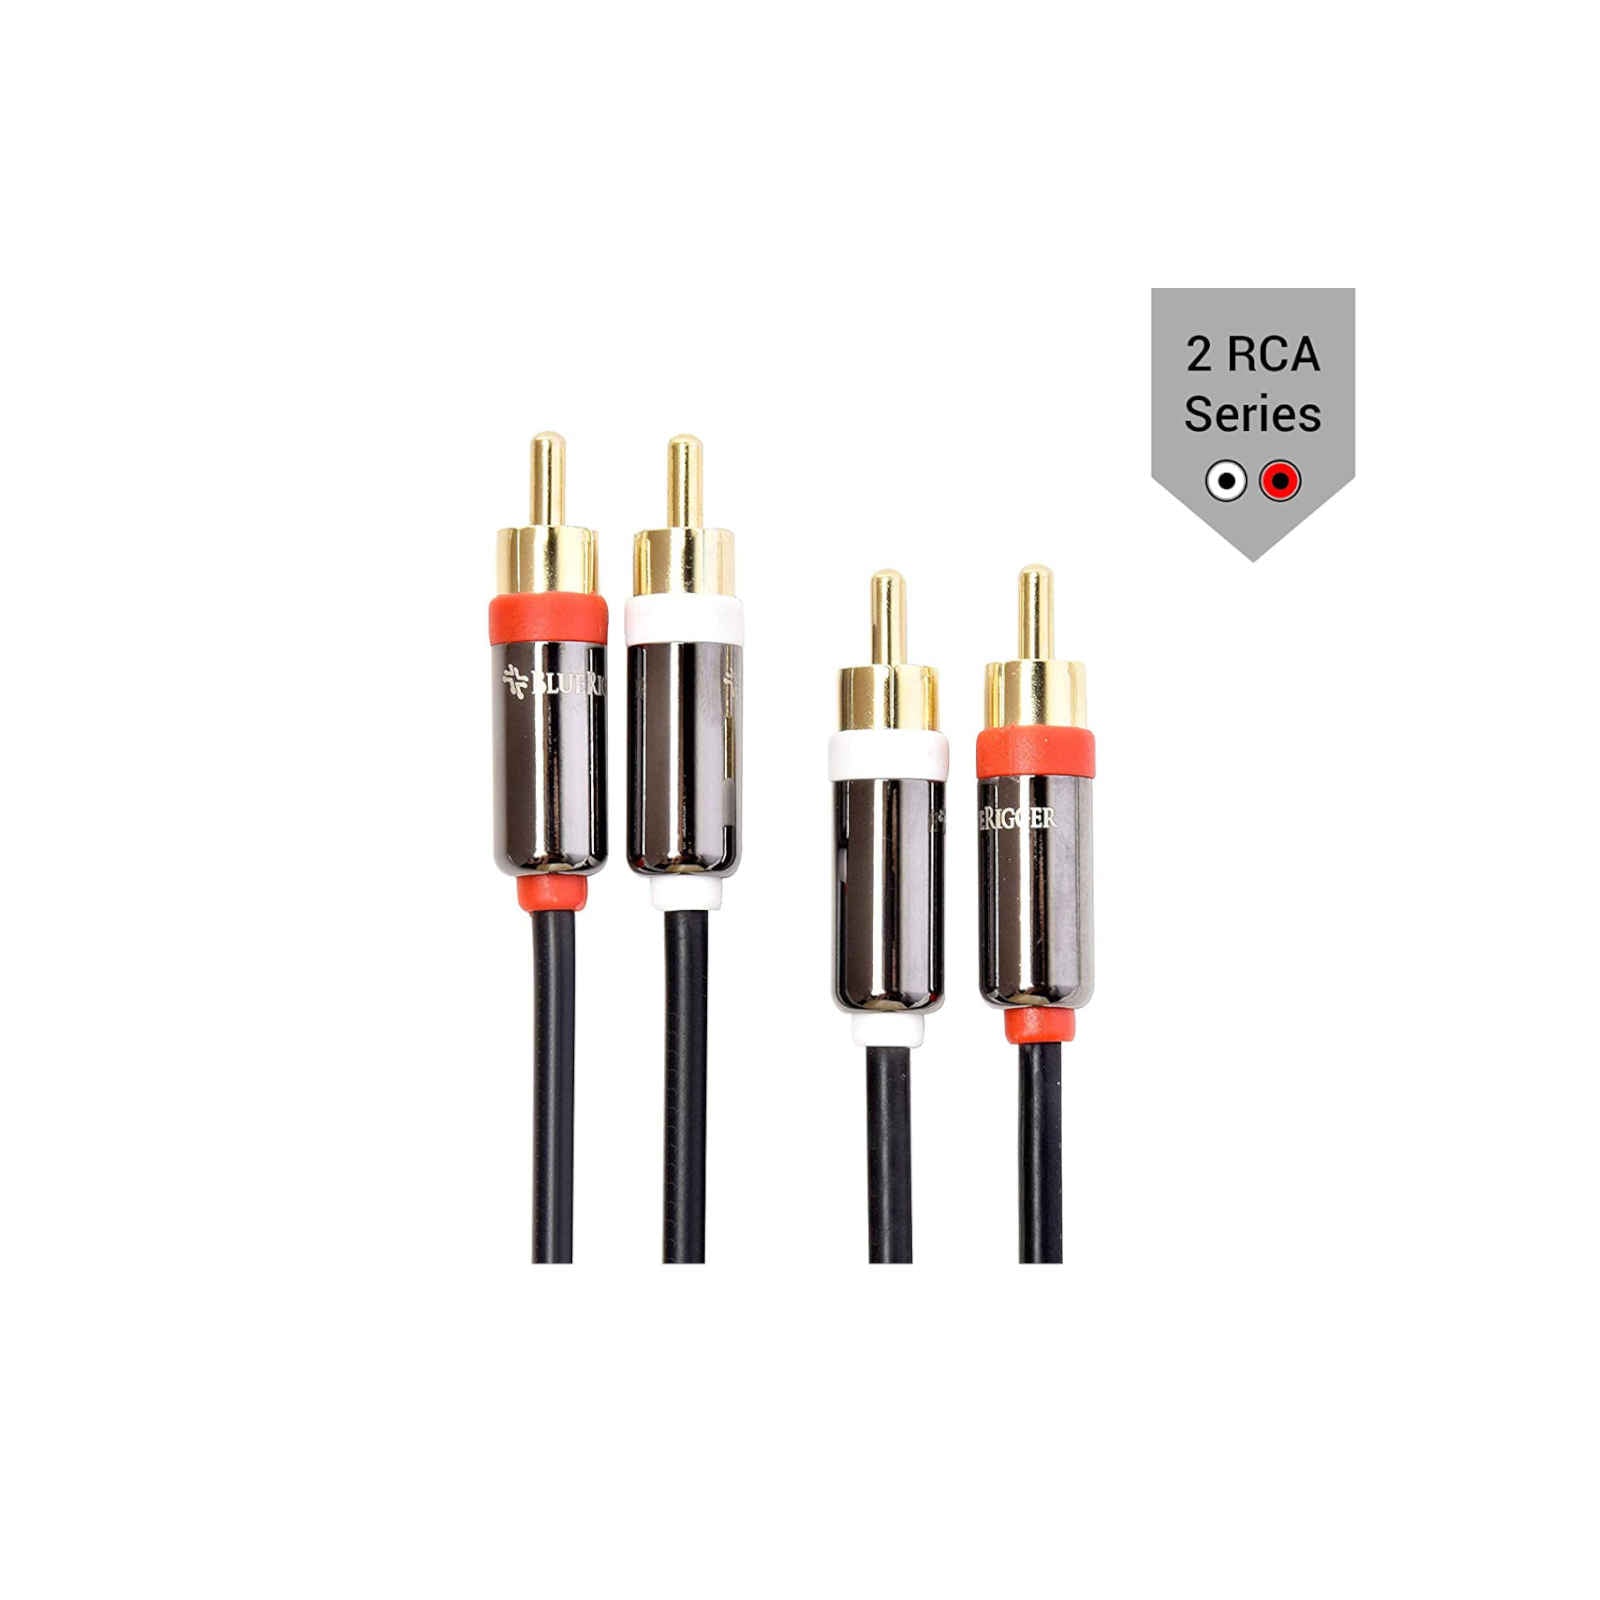 Component Video Cable with Audio (RCA- 5 Cable, Supports 1080i) – Bluerigger